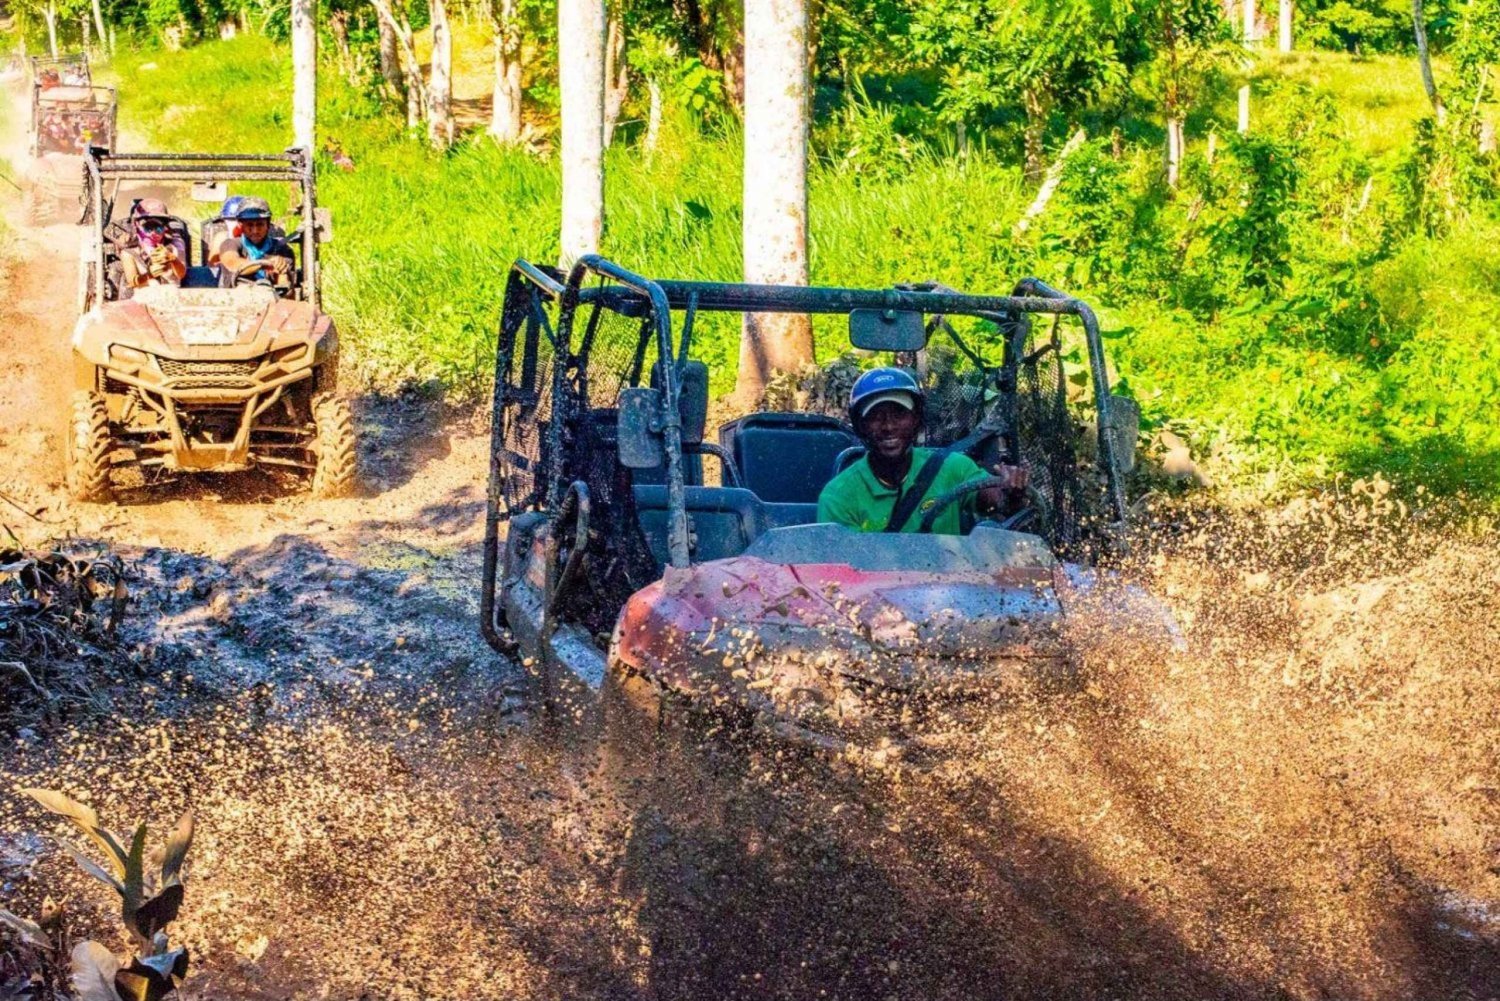 Rainforest off road adventure buggies from punta cana